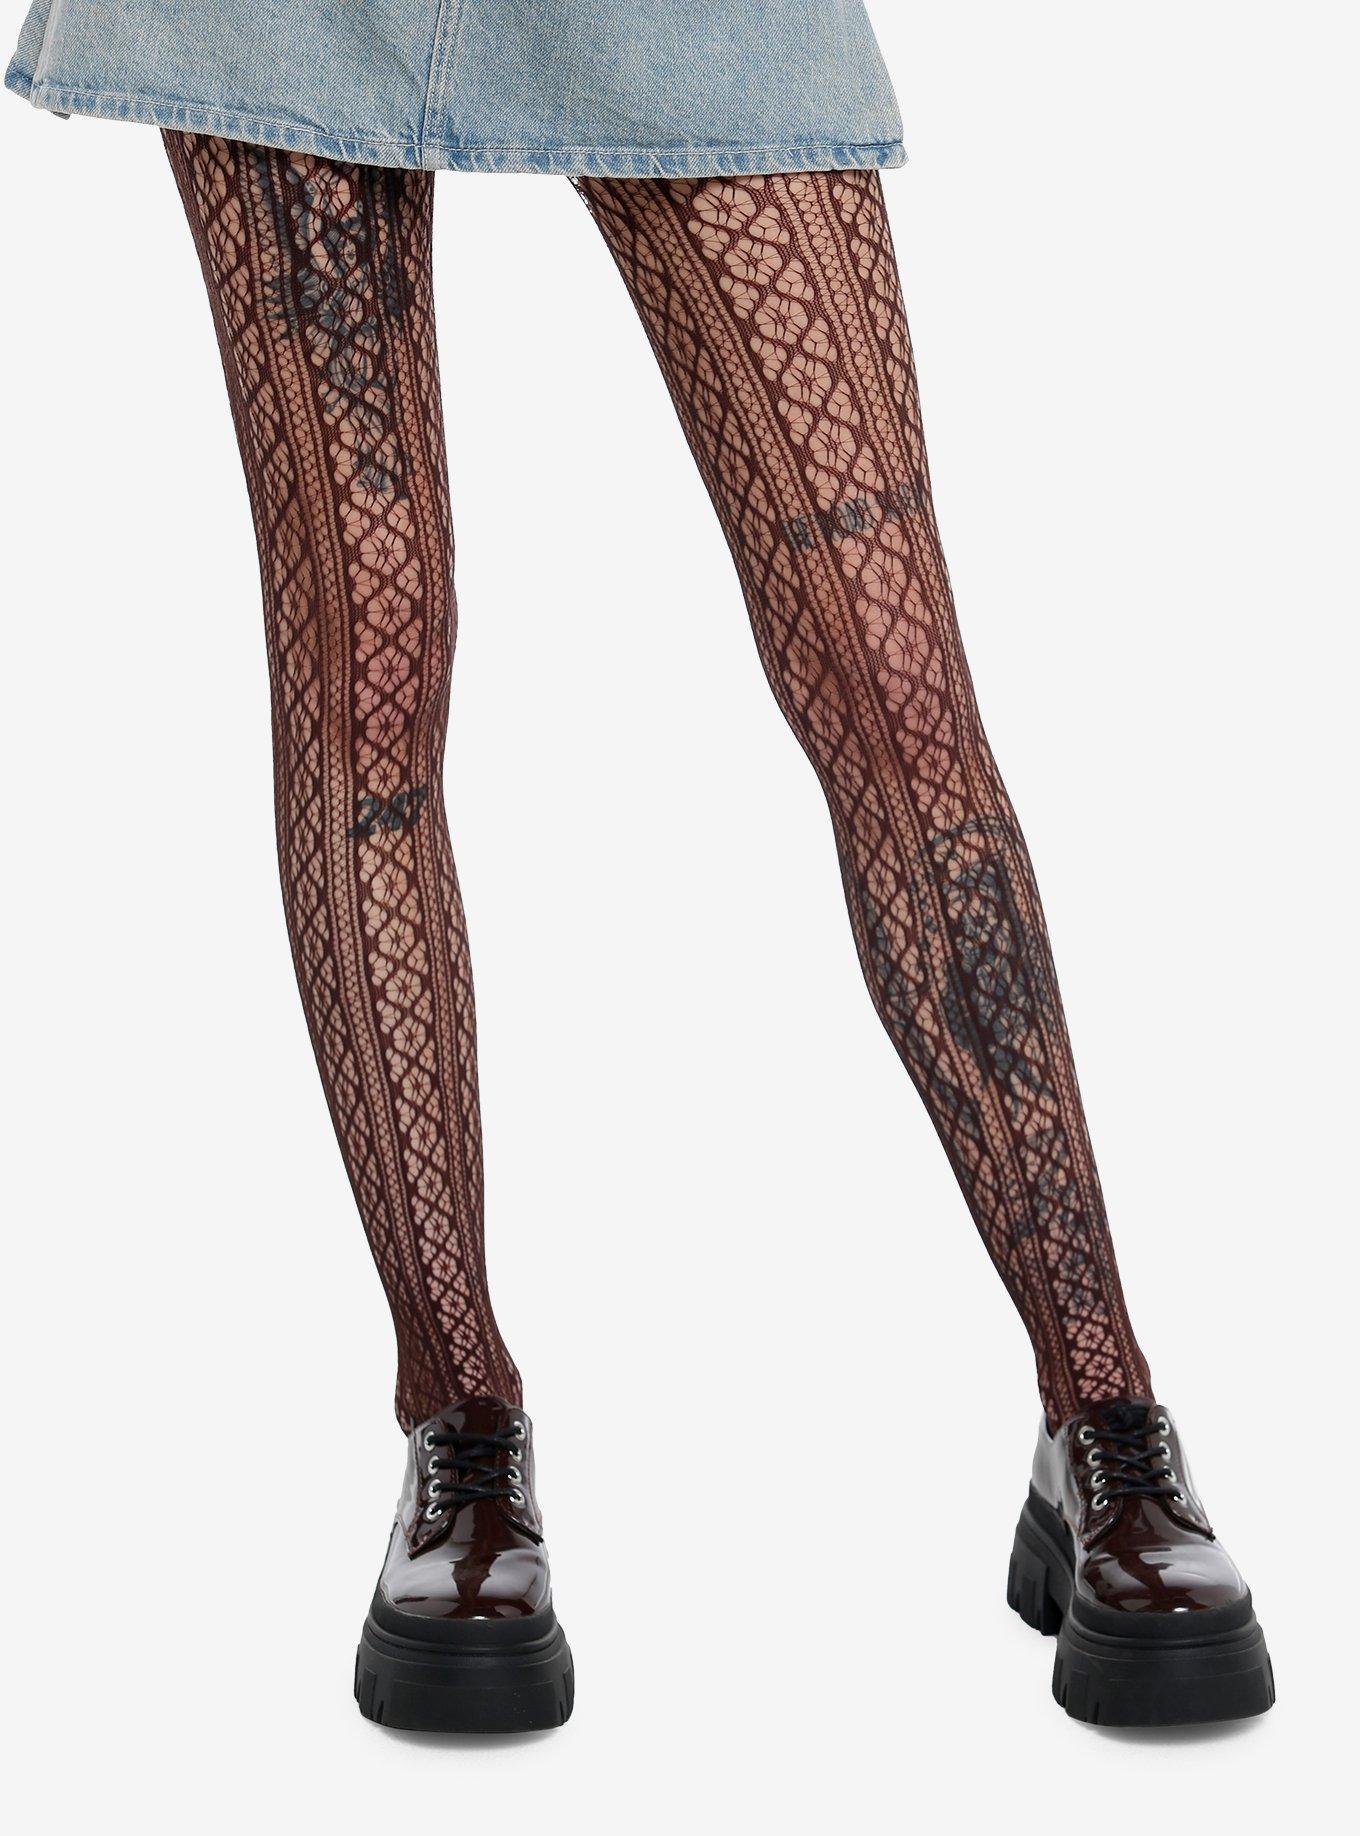 Boao 6 Pairs Fishnet Stockings High Waist Lace Tights for Girls